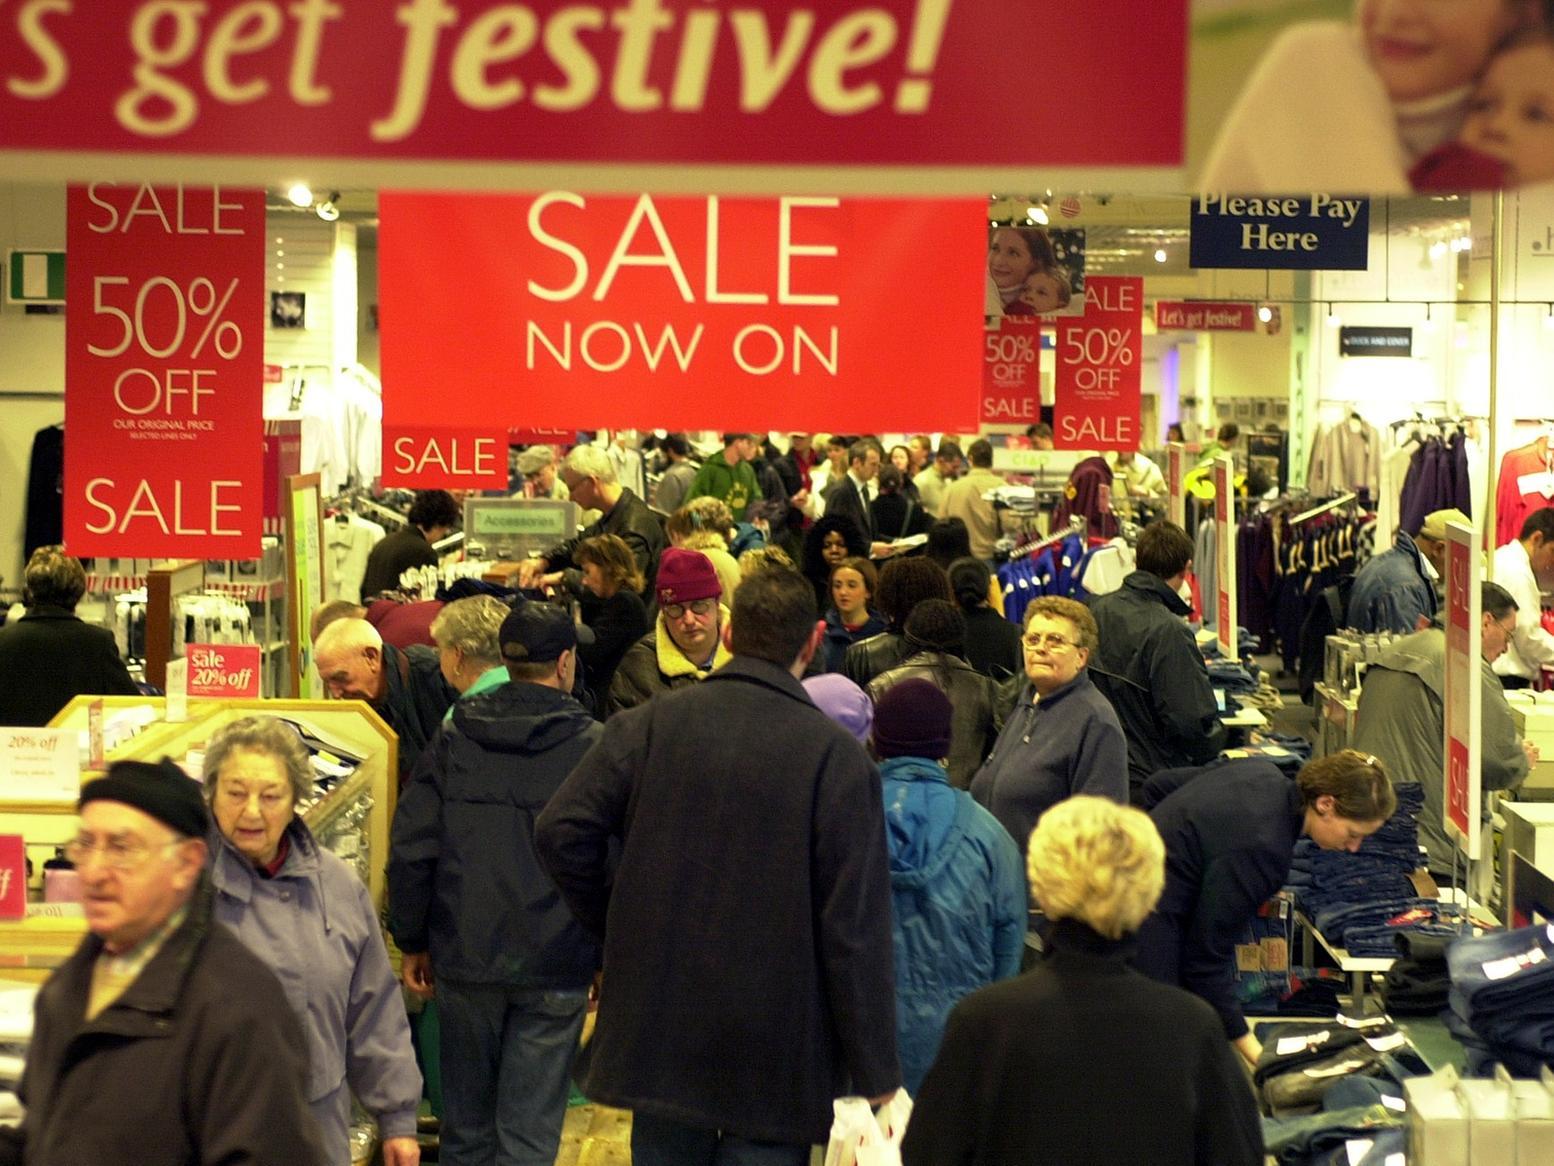 Remember Allders on The Headrow? This was the scene for the Christmas sales.